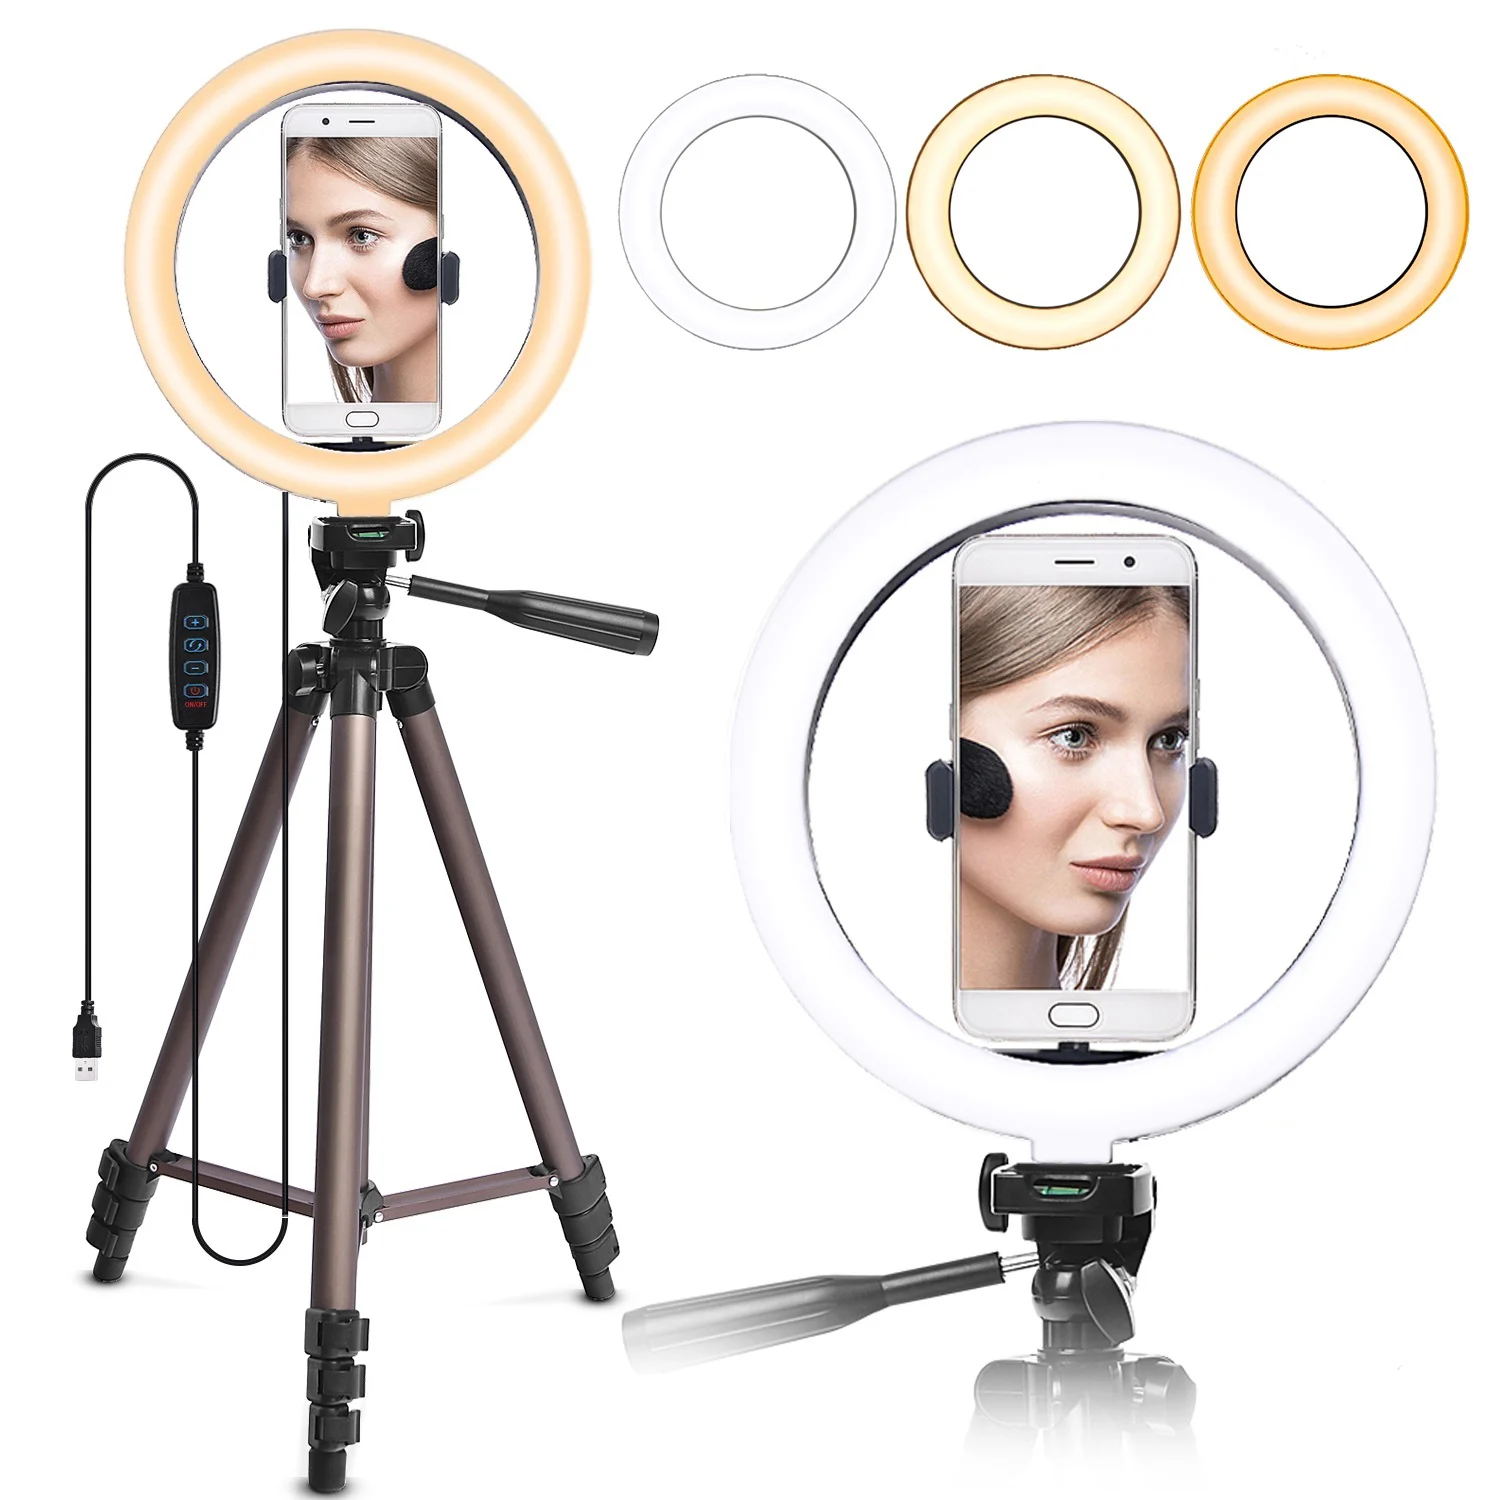 

FOSOTO 26cm Led Selfie Ring light USB Port 10" Ring Lamp photography Ringlight With 50" Tripod For Phone Makeup Youtube Video